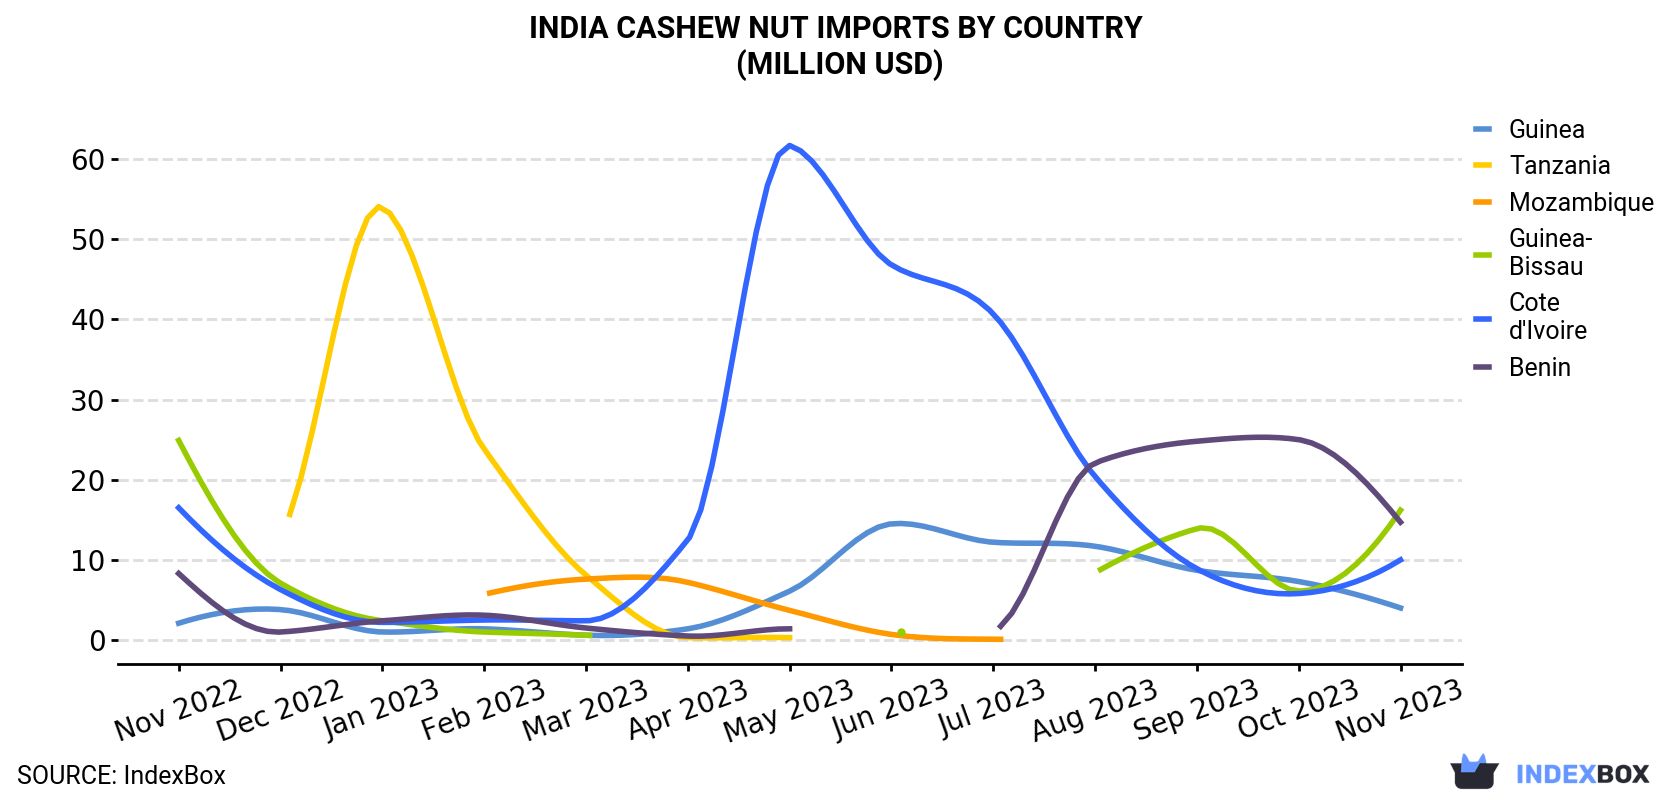 India Cashew Nut Imports By Country (Million USD)